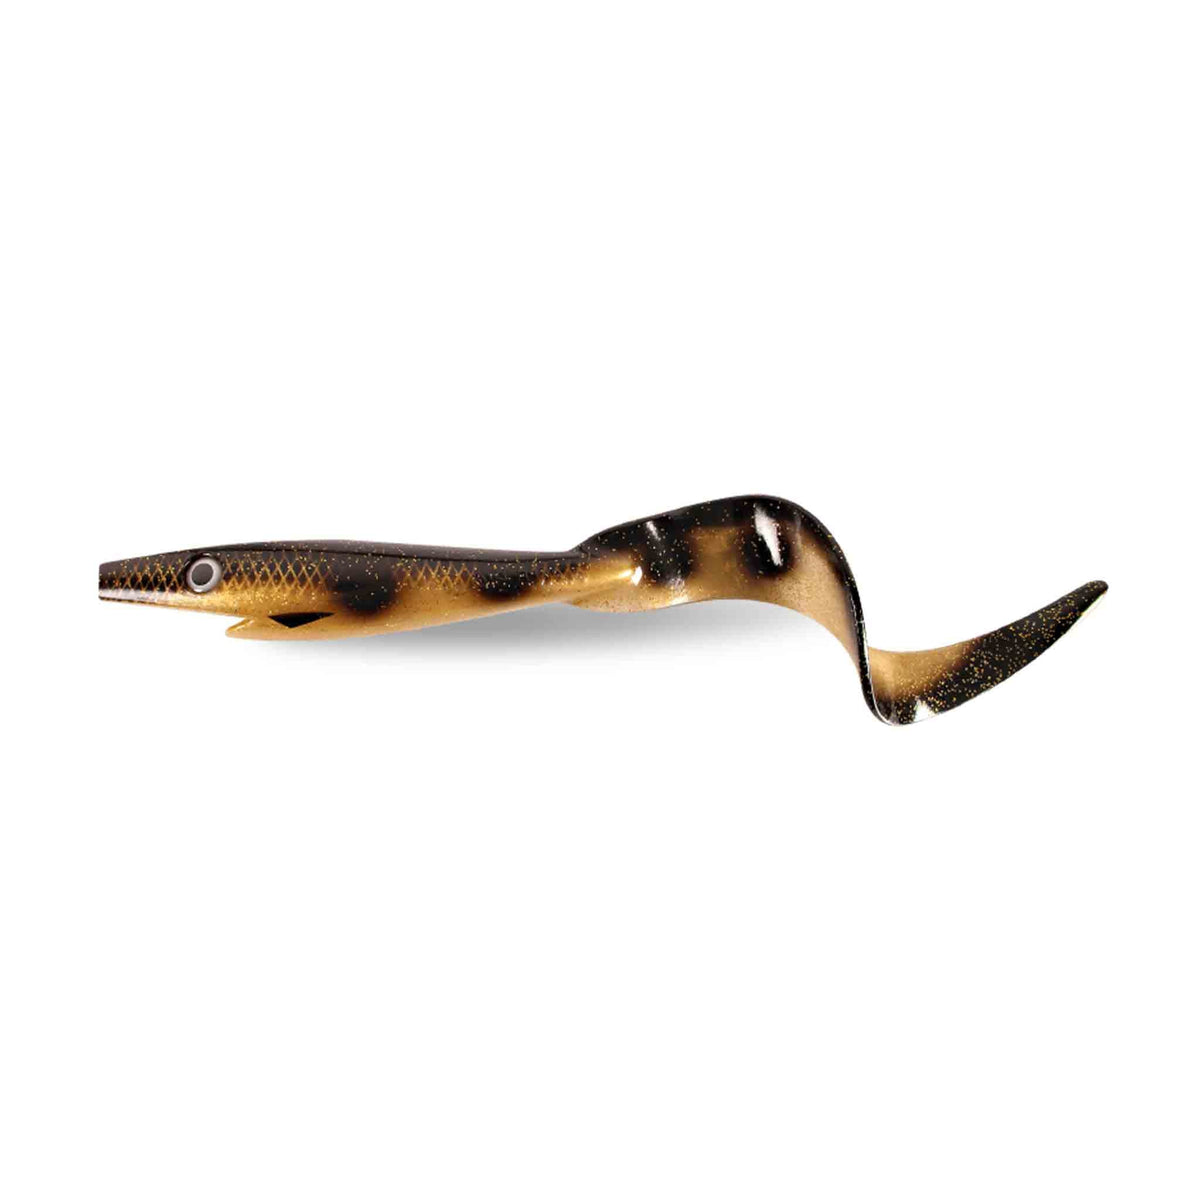 View of Swimbaits Strike Pro Giant Pig Tail Swimbait Spotted Bullhead available at EZOKO Pike and Musky Shop